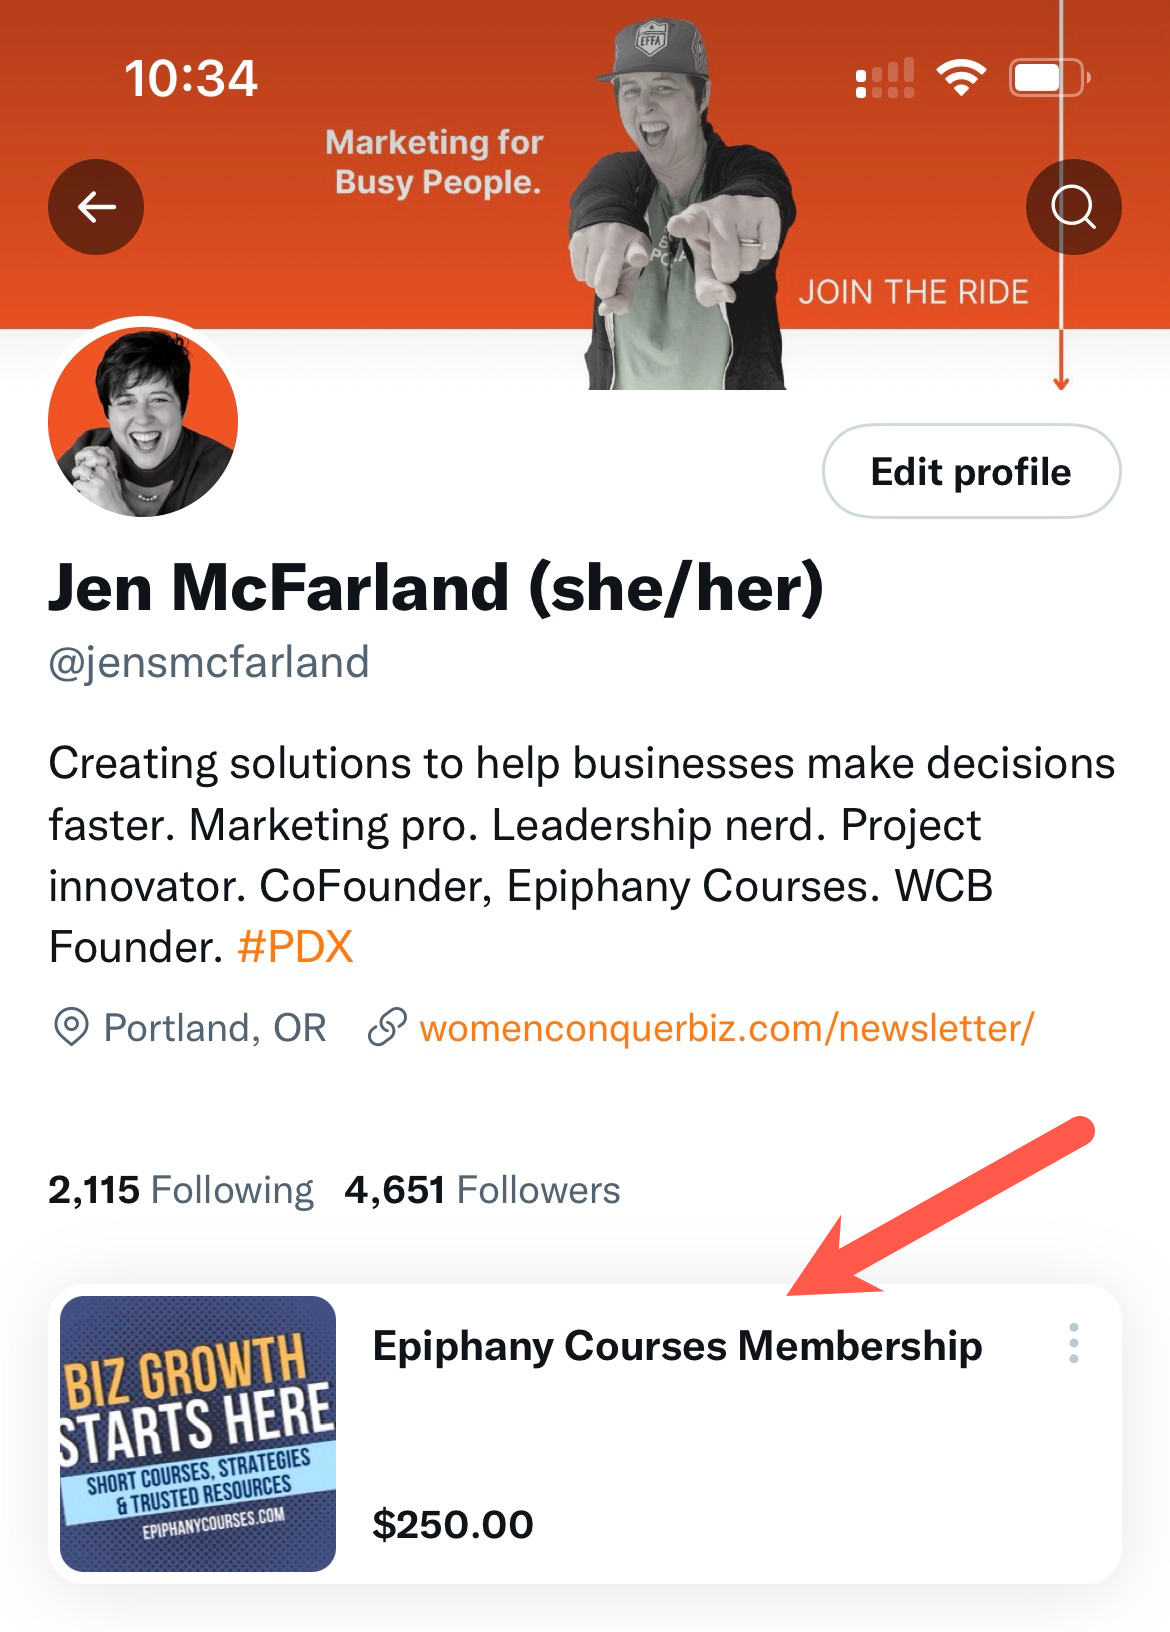 Here's my Twitter profile with a link to the annual Epiphany Courses membership product.